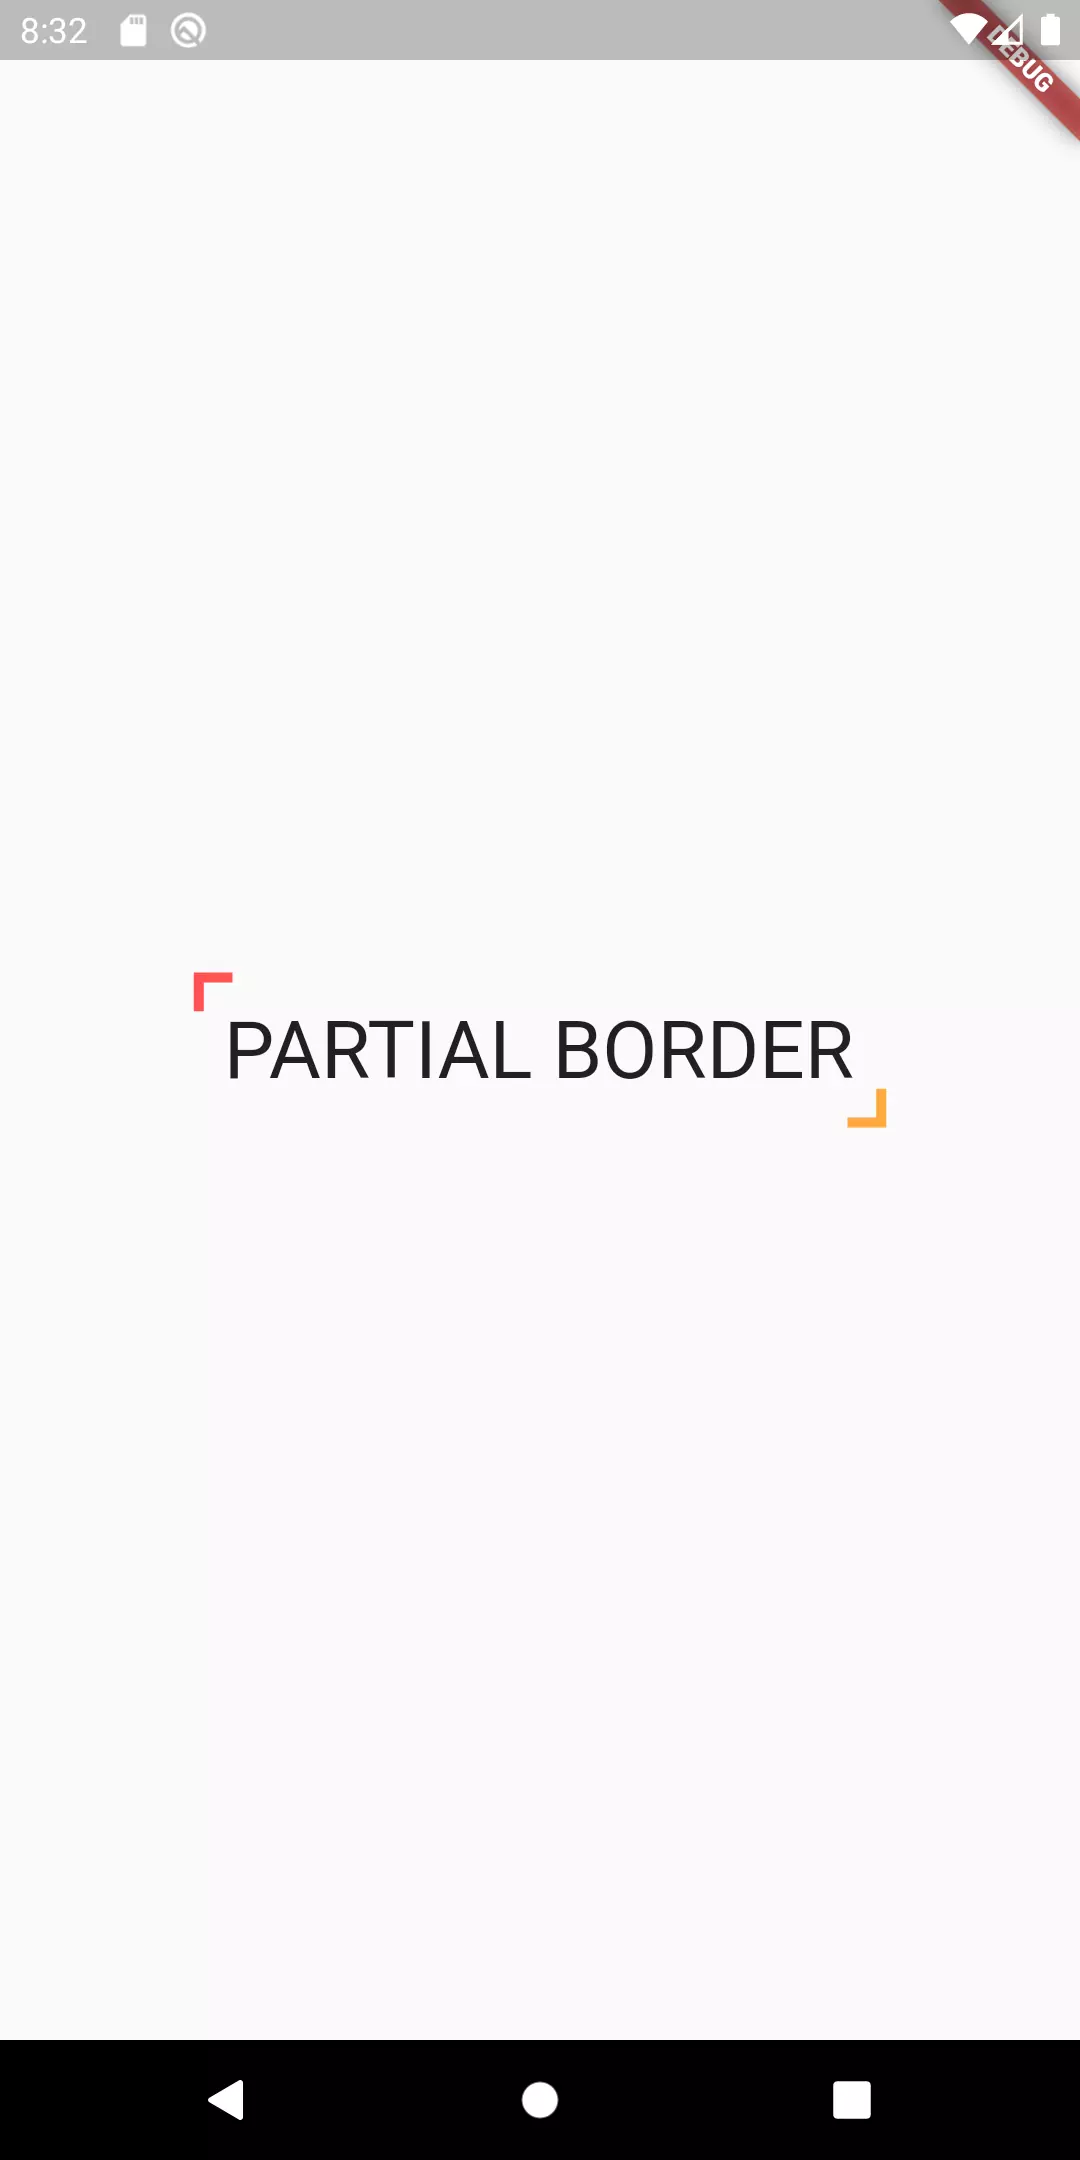 How To Add A Border Widget